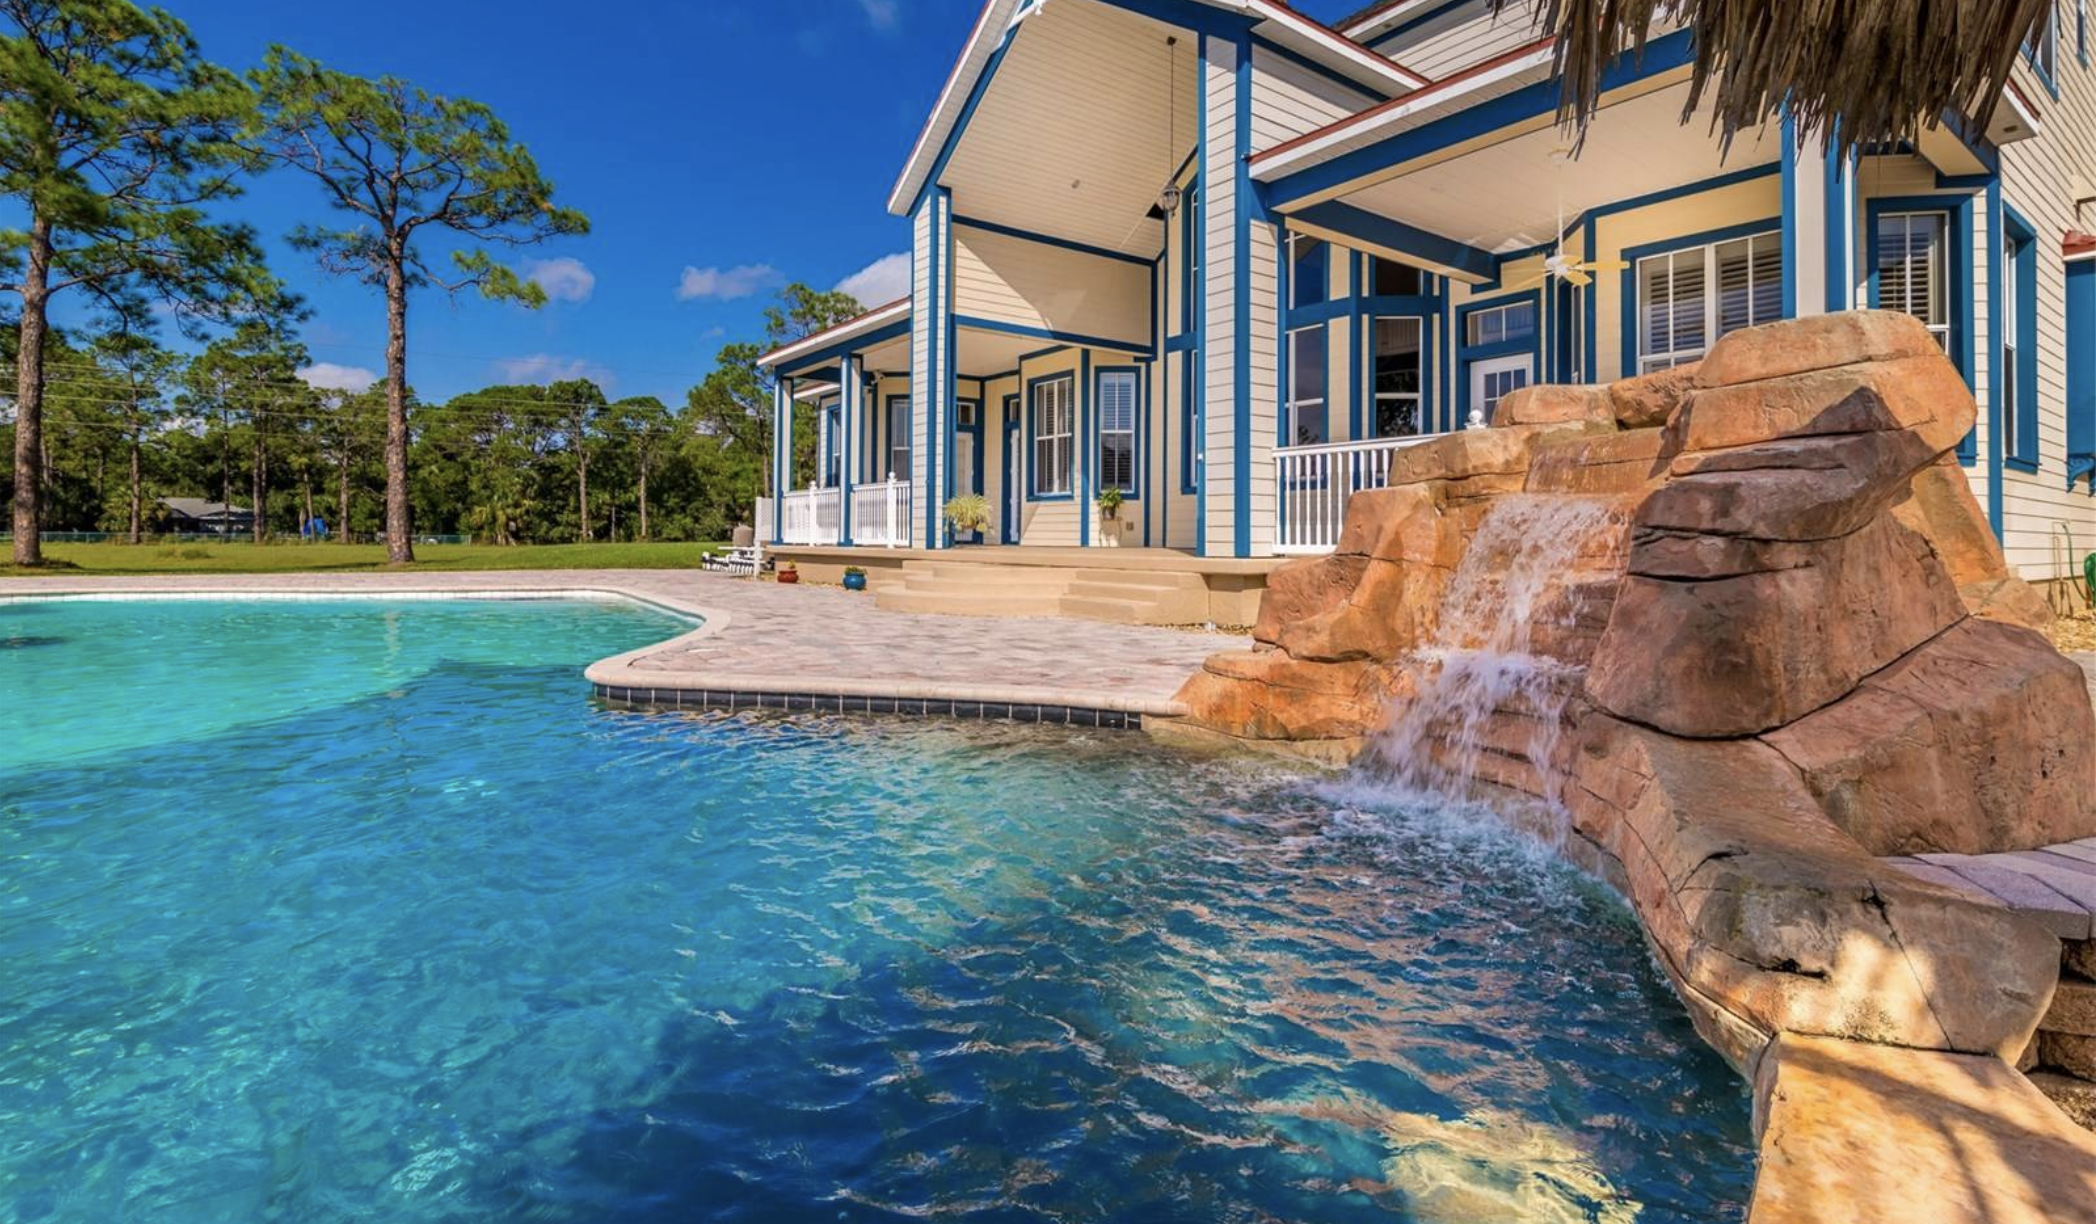 Disney-Themed Home for Sale (With a Mickey-Mouse Pool!)